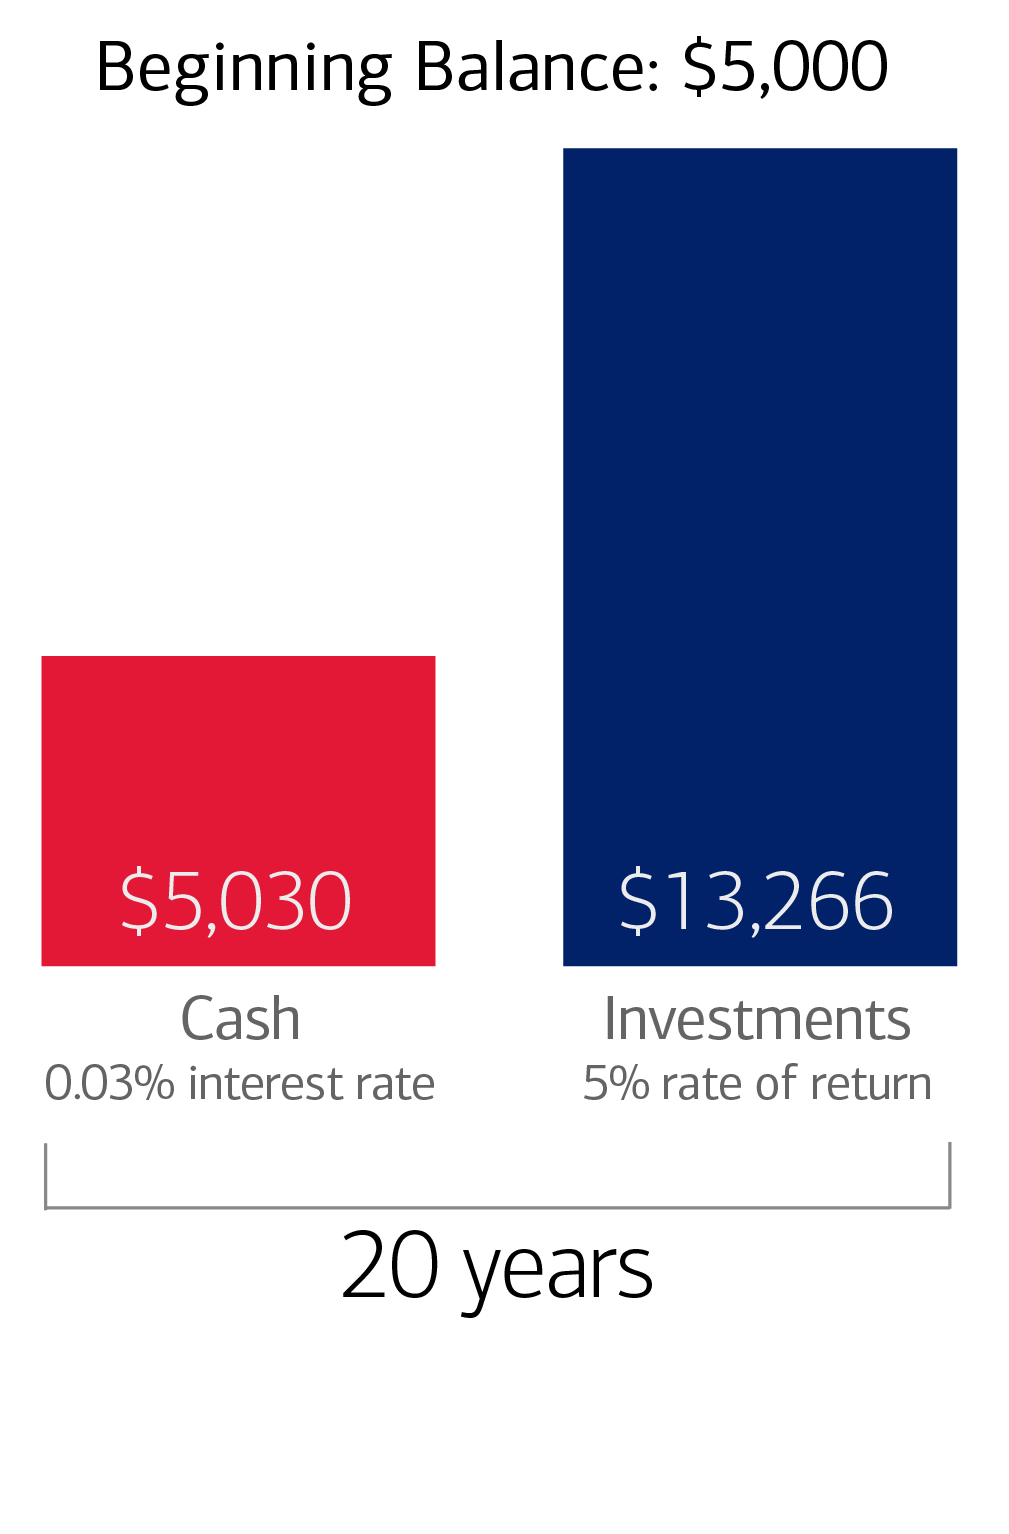 Bar chart shows comparison of HSA dollars in cash and investments. With a beginning balance of $5,000 and a .03% interest rate the cash balance is $5,030 after 20 years and, assuming a 5% rate of return, the investment balance is $13,266.